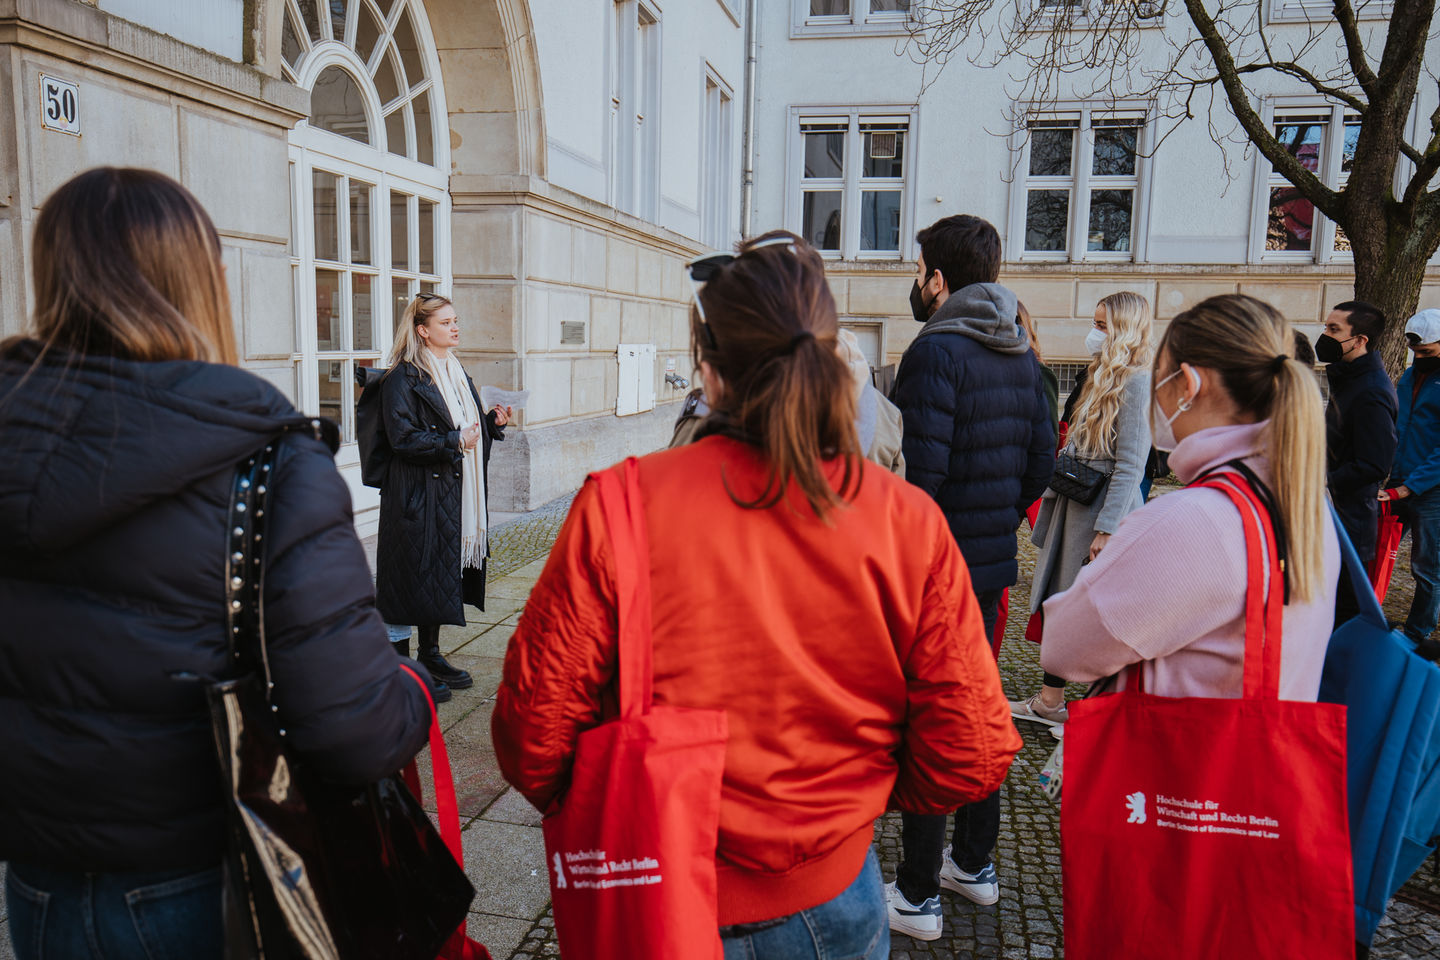 Campus tour of altogether 300 exchange students from 39 different nations at the HWR Berlin in March 2022. Photo: Oana Popa-Costea